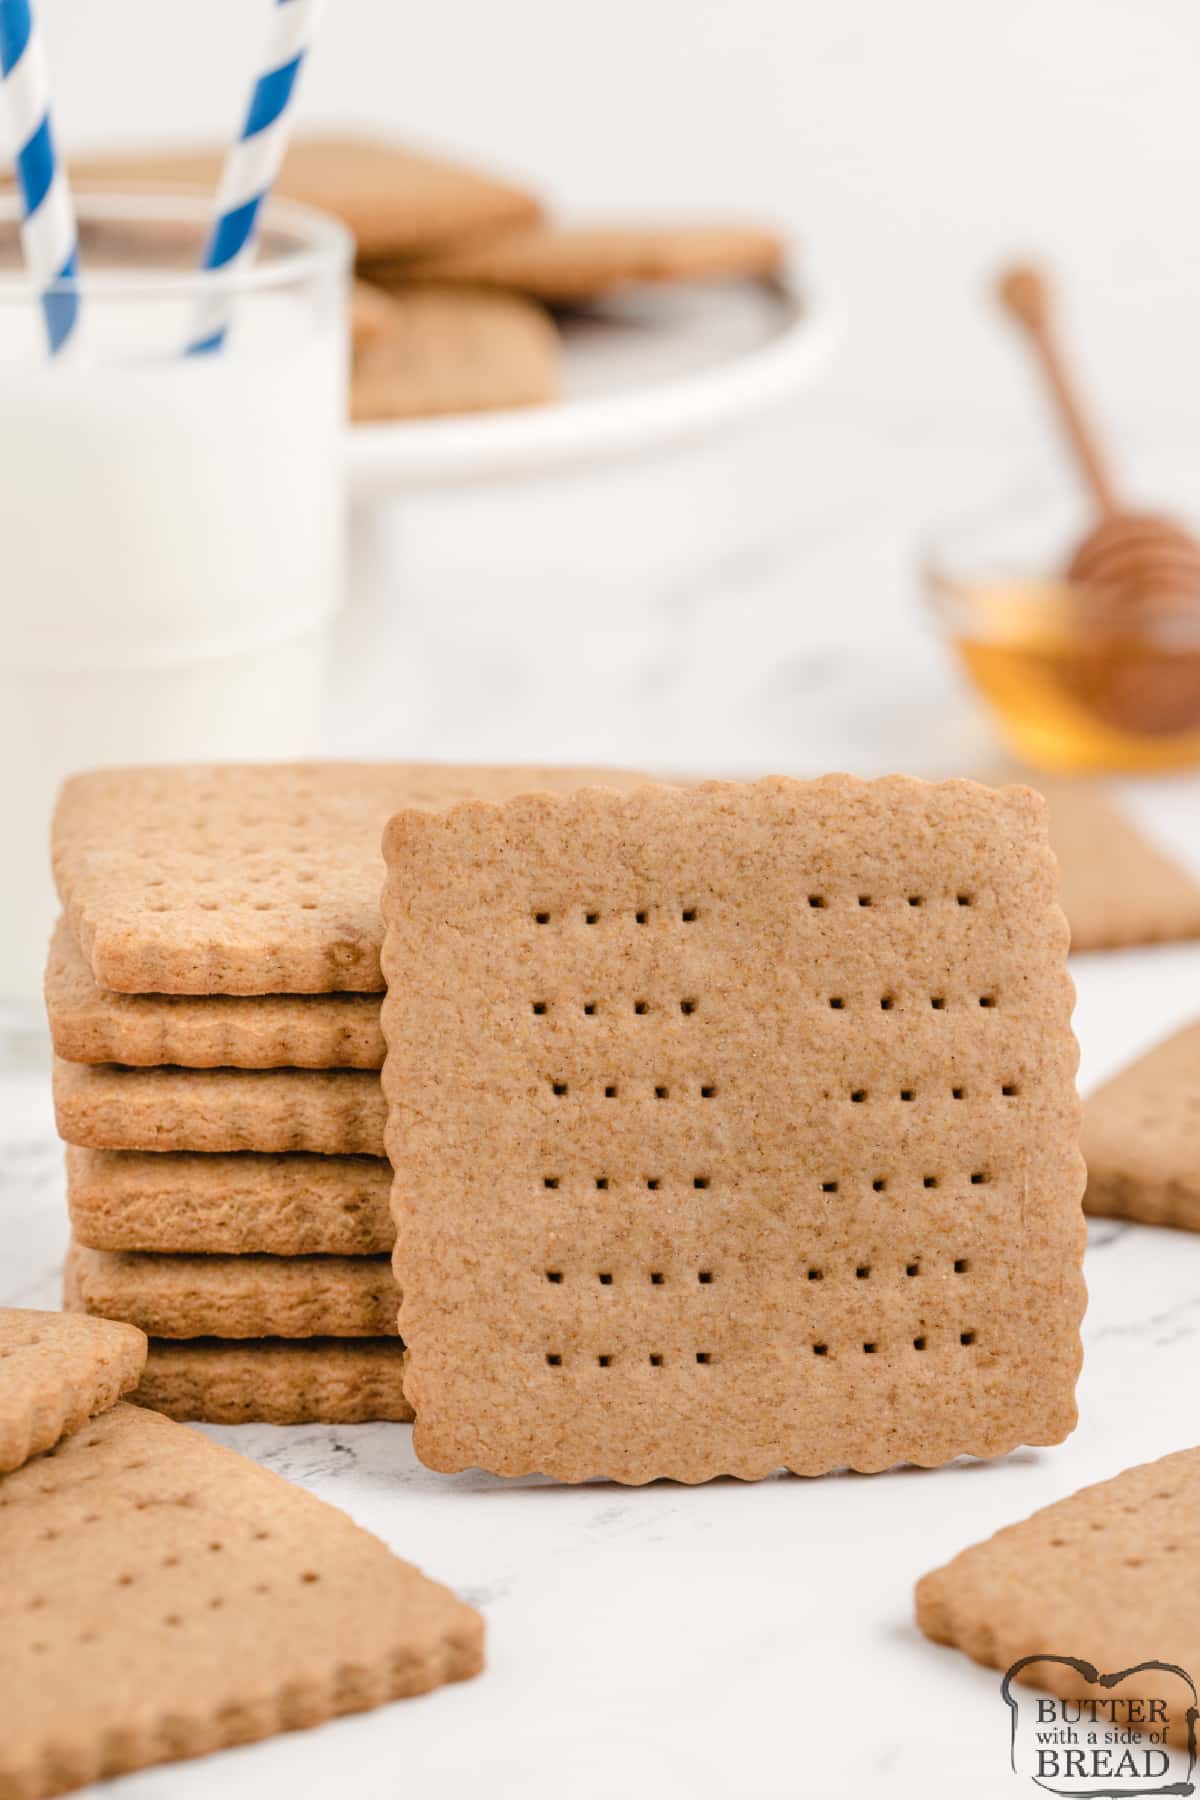 Graham cracker recipe made with whole wheat flour and honey